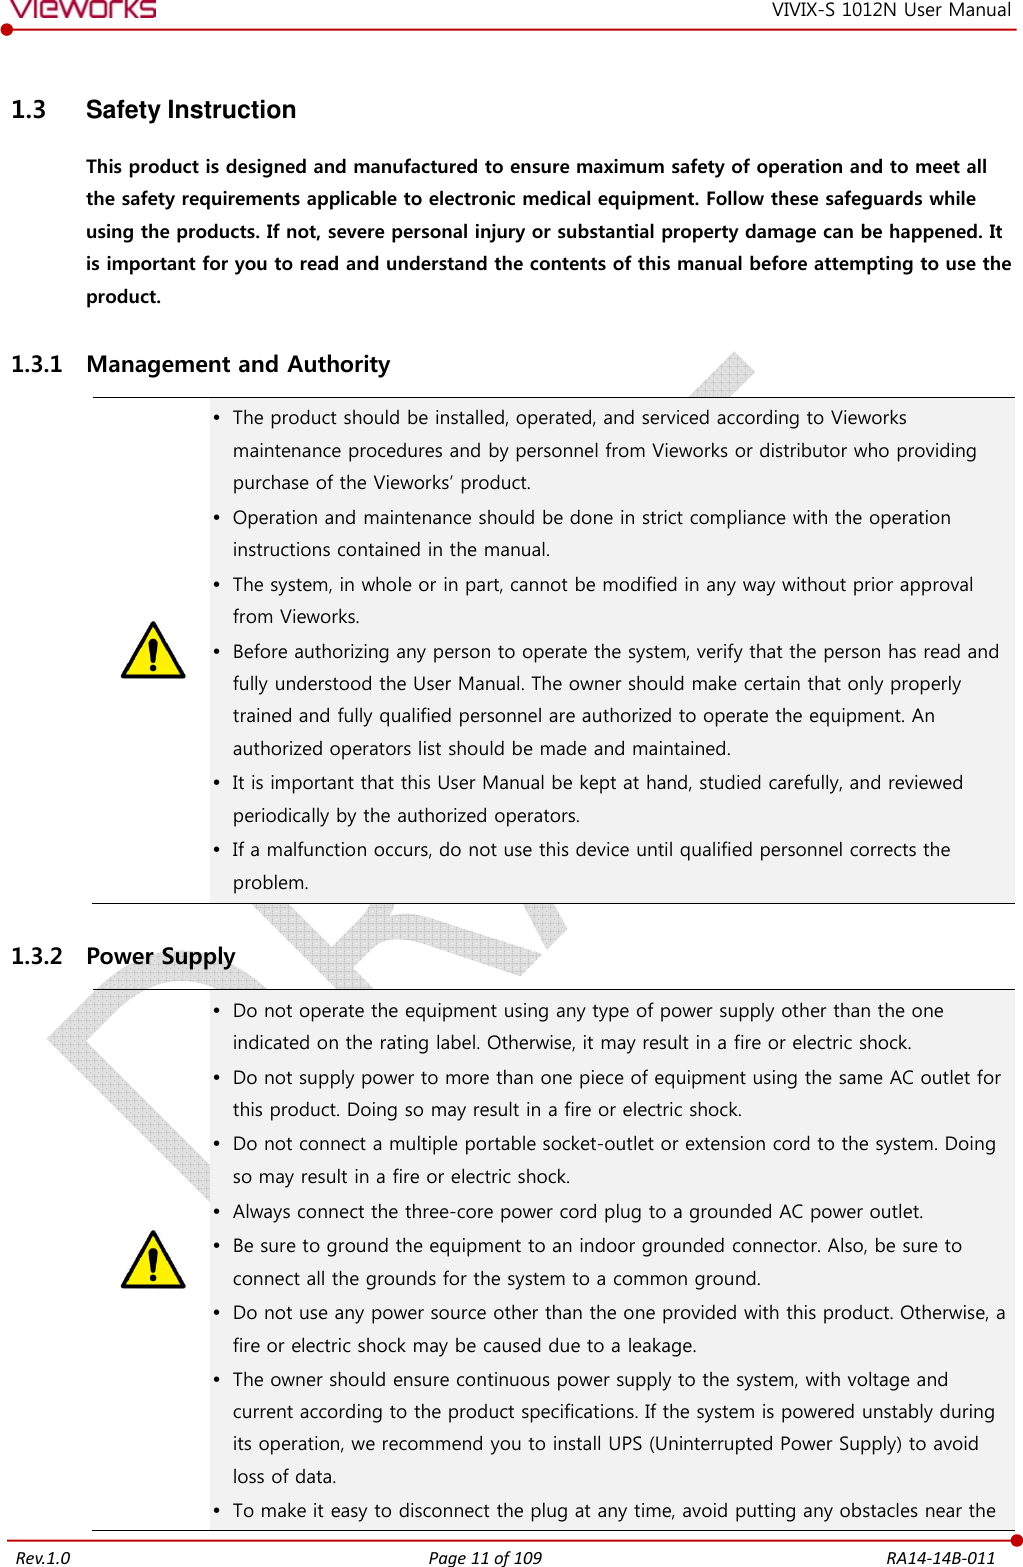   Rev.1.0 Page 11 of 109  RA14-14B-011 VIVIX-S 1012N User Manual 1.3  Safety Instruction This product is designed and manufactured to ensure maximum safety of operation and to meet all the safety requirements applicable to electronic medical equipment. Follow these safeguards while using the products. If not, severe personal injury or substantial property damage can be happened. It is important for you to read and understand the contents of this manual before attempting to use the product. 1.3.1 Management and Authority   The product should be installed, operated, and serviced according to Vieworks maintenance procedures and by personnel from Vieworks or distributor who providing purchase of the Vieworks’ product.  Operation and maintenance should be done in strict compliance with the operation instructions contained in the manual.  The system, in whole or in part, cannot be modified in any way without prior approval from Vieworks.  Before authorizing any person to operate the system, verify that the person has read and fully understood the User Manual. The owner should make certain that only properly trained and fully qualified personnel are authorized to operate the equipment. An authorized operators list should be made and maintained.  It is important that this User Manual be kept at hand, studied carefully, and reviewed periodically by the authorized operators.  If a malfunction occurs, do not use this device until qualified personnel corrects the problem. 1.3.2 Power Supply   Do not operate the equipment using any type of power supply other than the one indicated on the rating label. Otherwise, it may result in a fire or electric shock.  Do not supply power to more than one piece of equipment using the same AC outlet for this product. Doing so may result in a fire or electric shock.  Do not connect a multiple portable socket-outlet or extension cord to the system. Doing so may result in a fire or electric shock.  Always connect the three-core power cord plug to a grounded AC power outlet.  Be sure to ground the equipment to an indoor grounded connector. Also, be sure to connect all the grounds for the system to a common ground.  Do not use any power source other than the one provided with this product. Otherwise, a fire or electric shock may be caused due to a leakage.  The owner should ensure continuous power supply to the system, with voltage and current according to the product specifications. If the system is powered unstably during its operation, we recommend you to install UPS (Uninterrupted Power Supply) to avoid loss of data.  To make it easy to disconnect the plug at any time, avoid putting any obstacles near the 